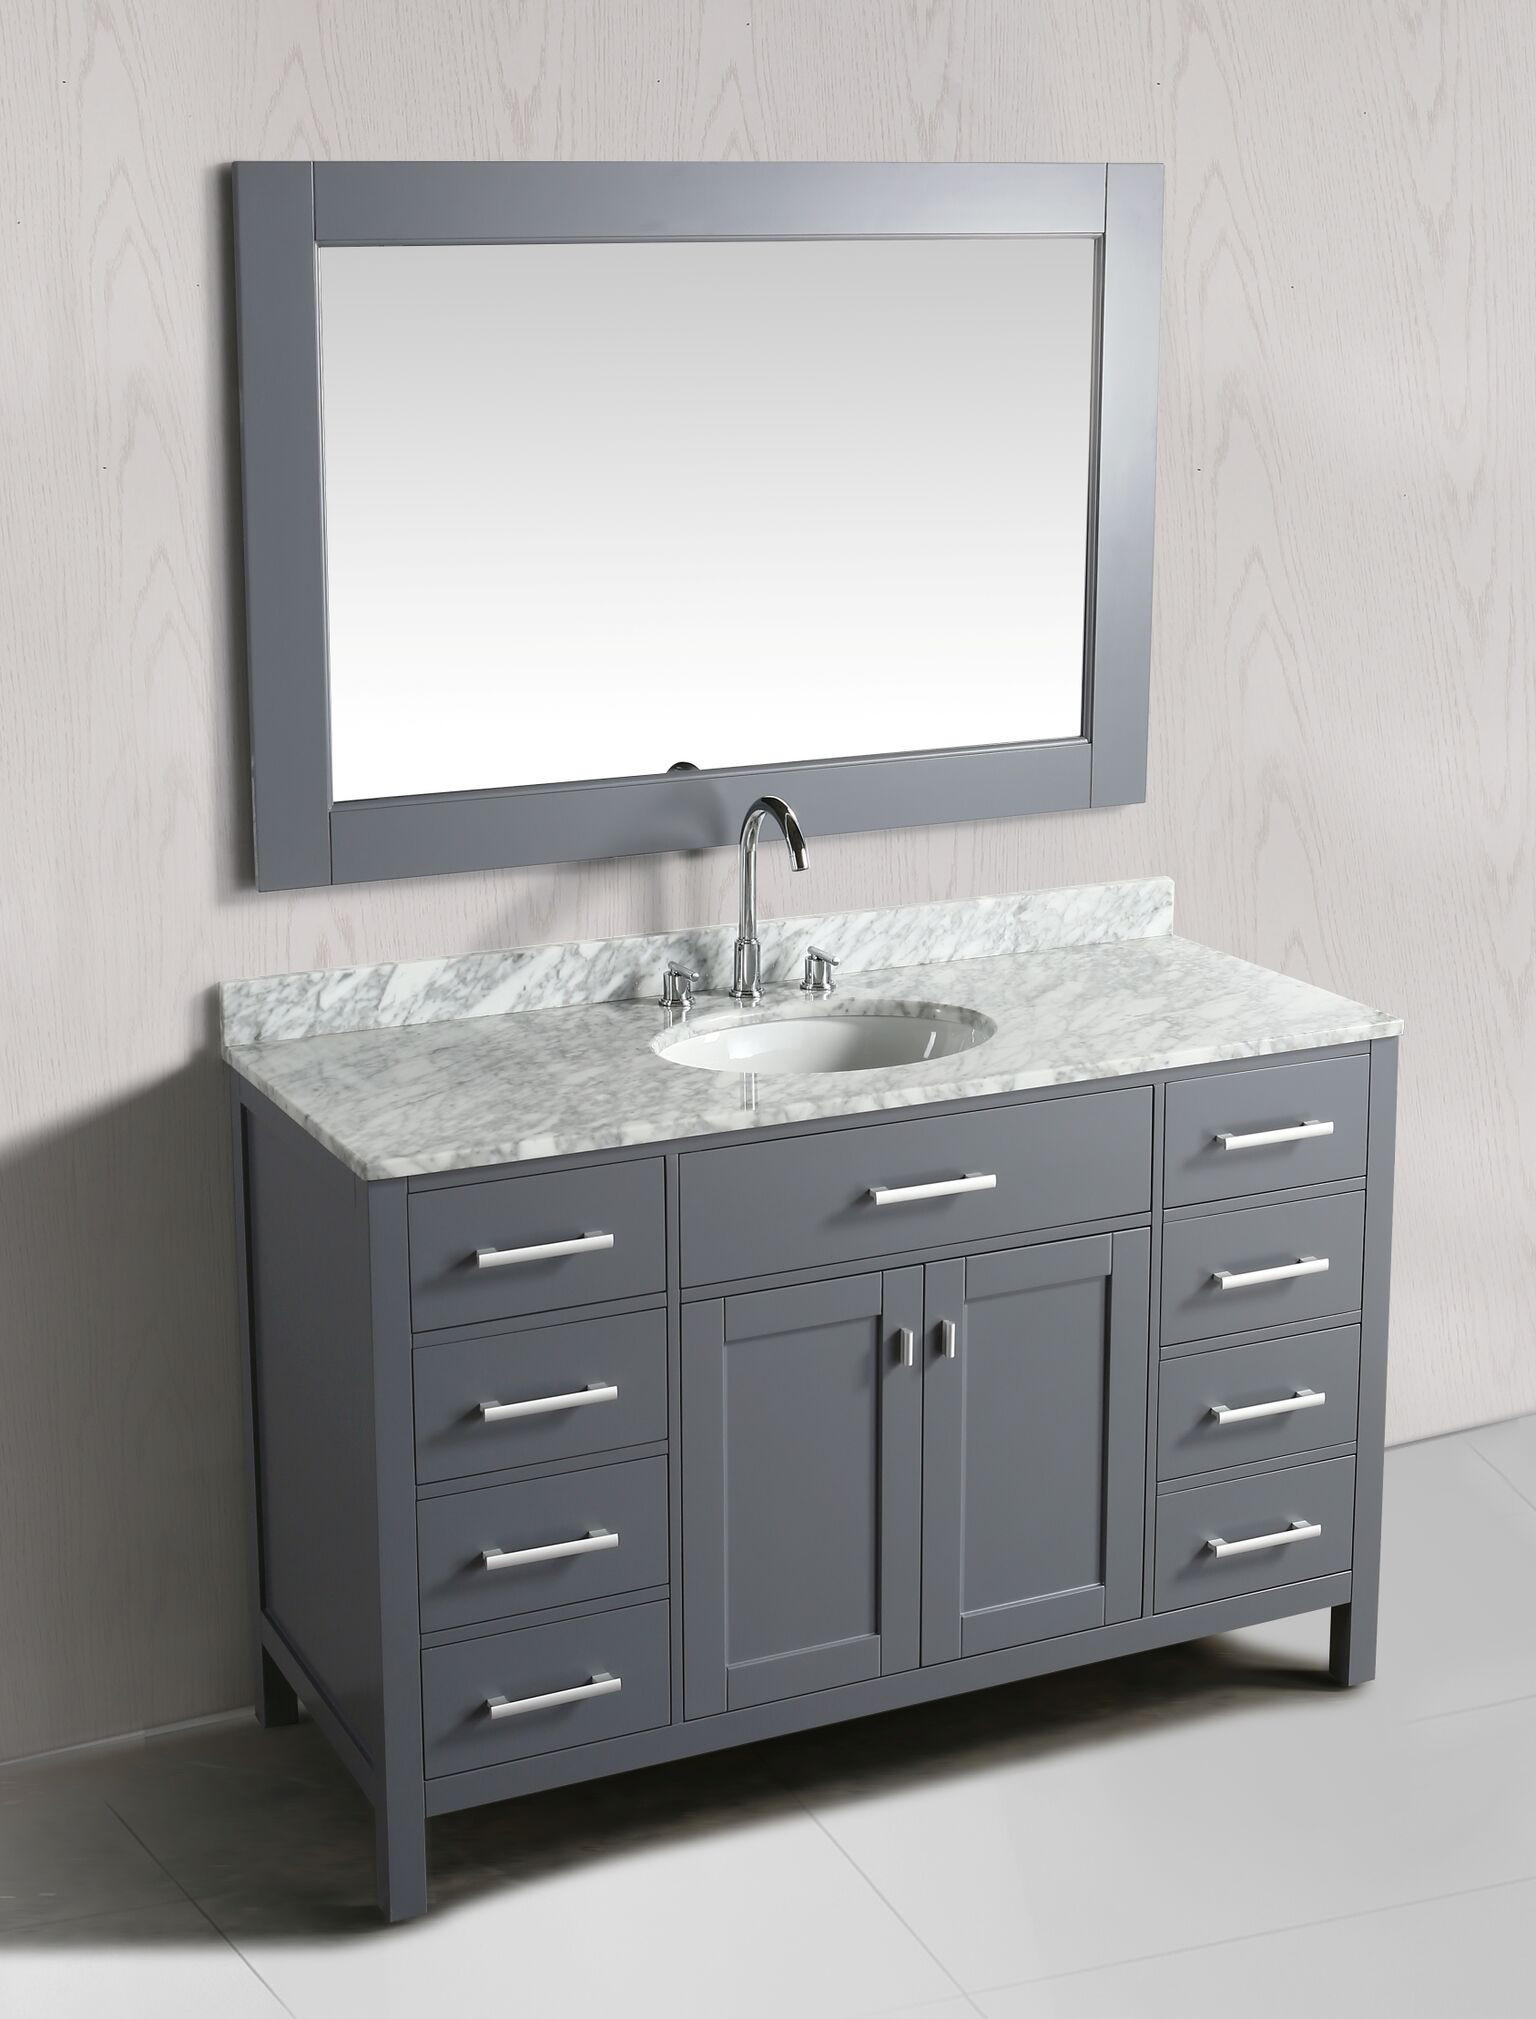 54 Inch Bathroom Vanity
 54 Inch Bathroom Vanity Single Sink 2018 Home forts